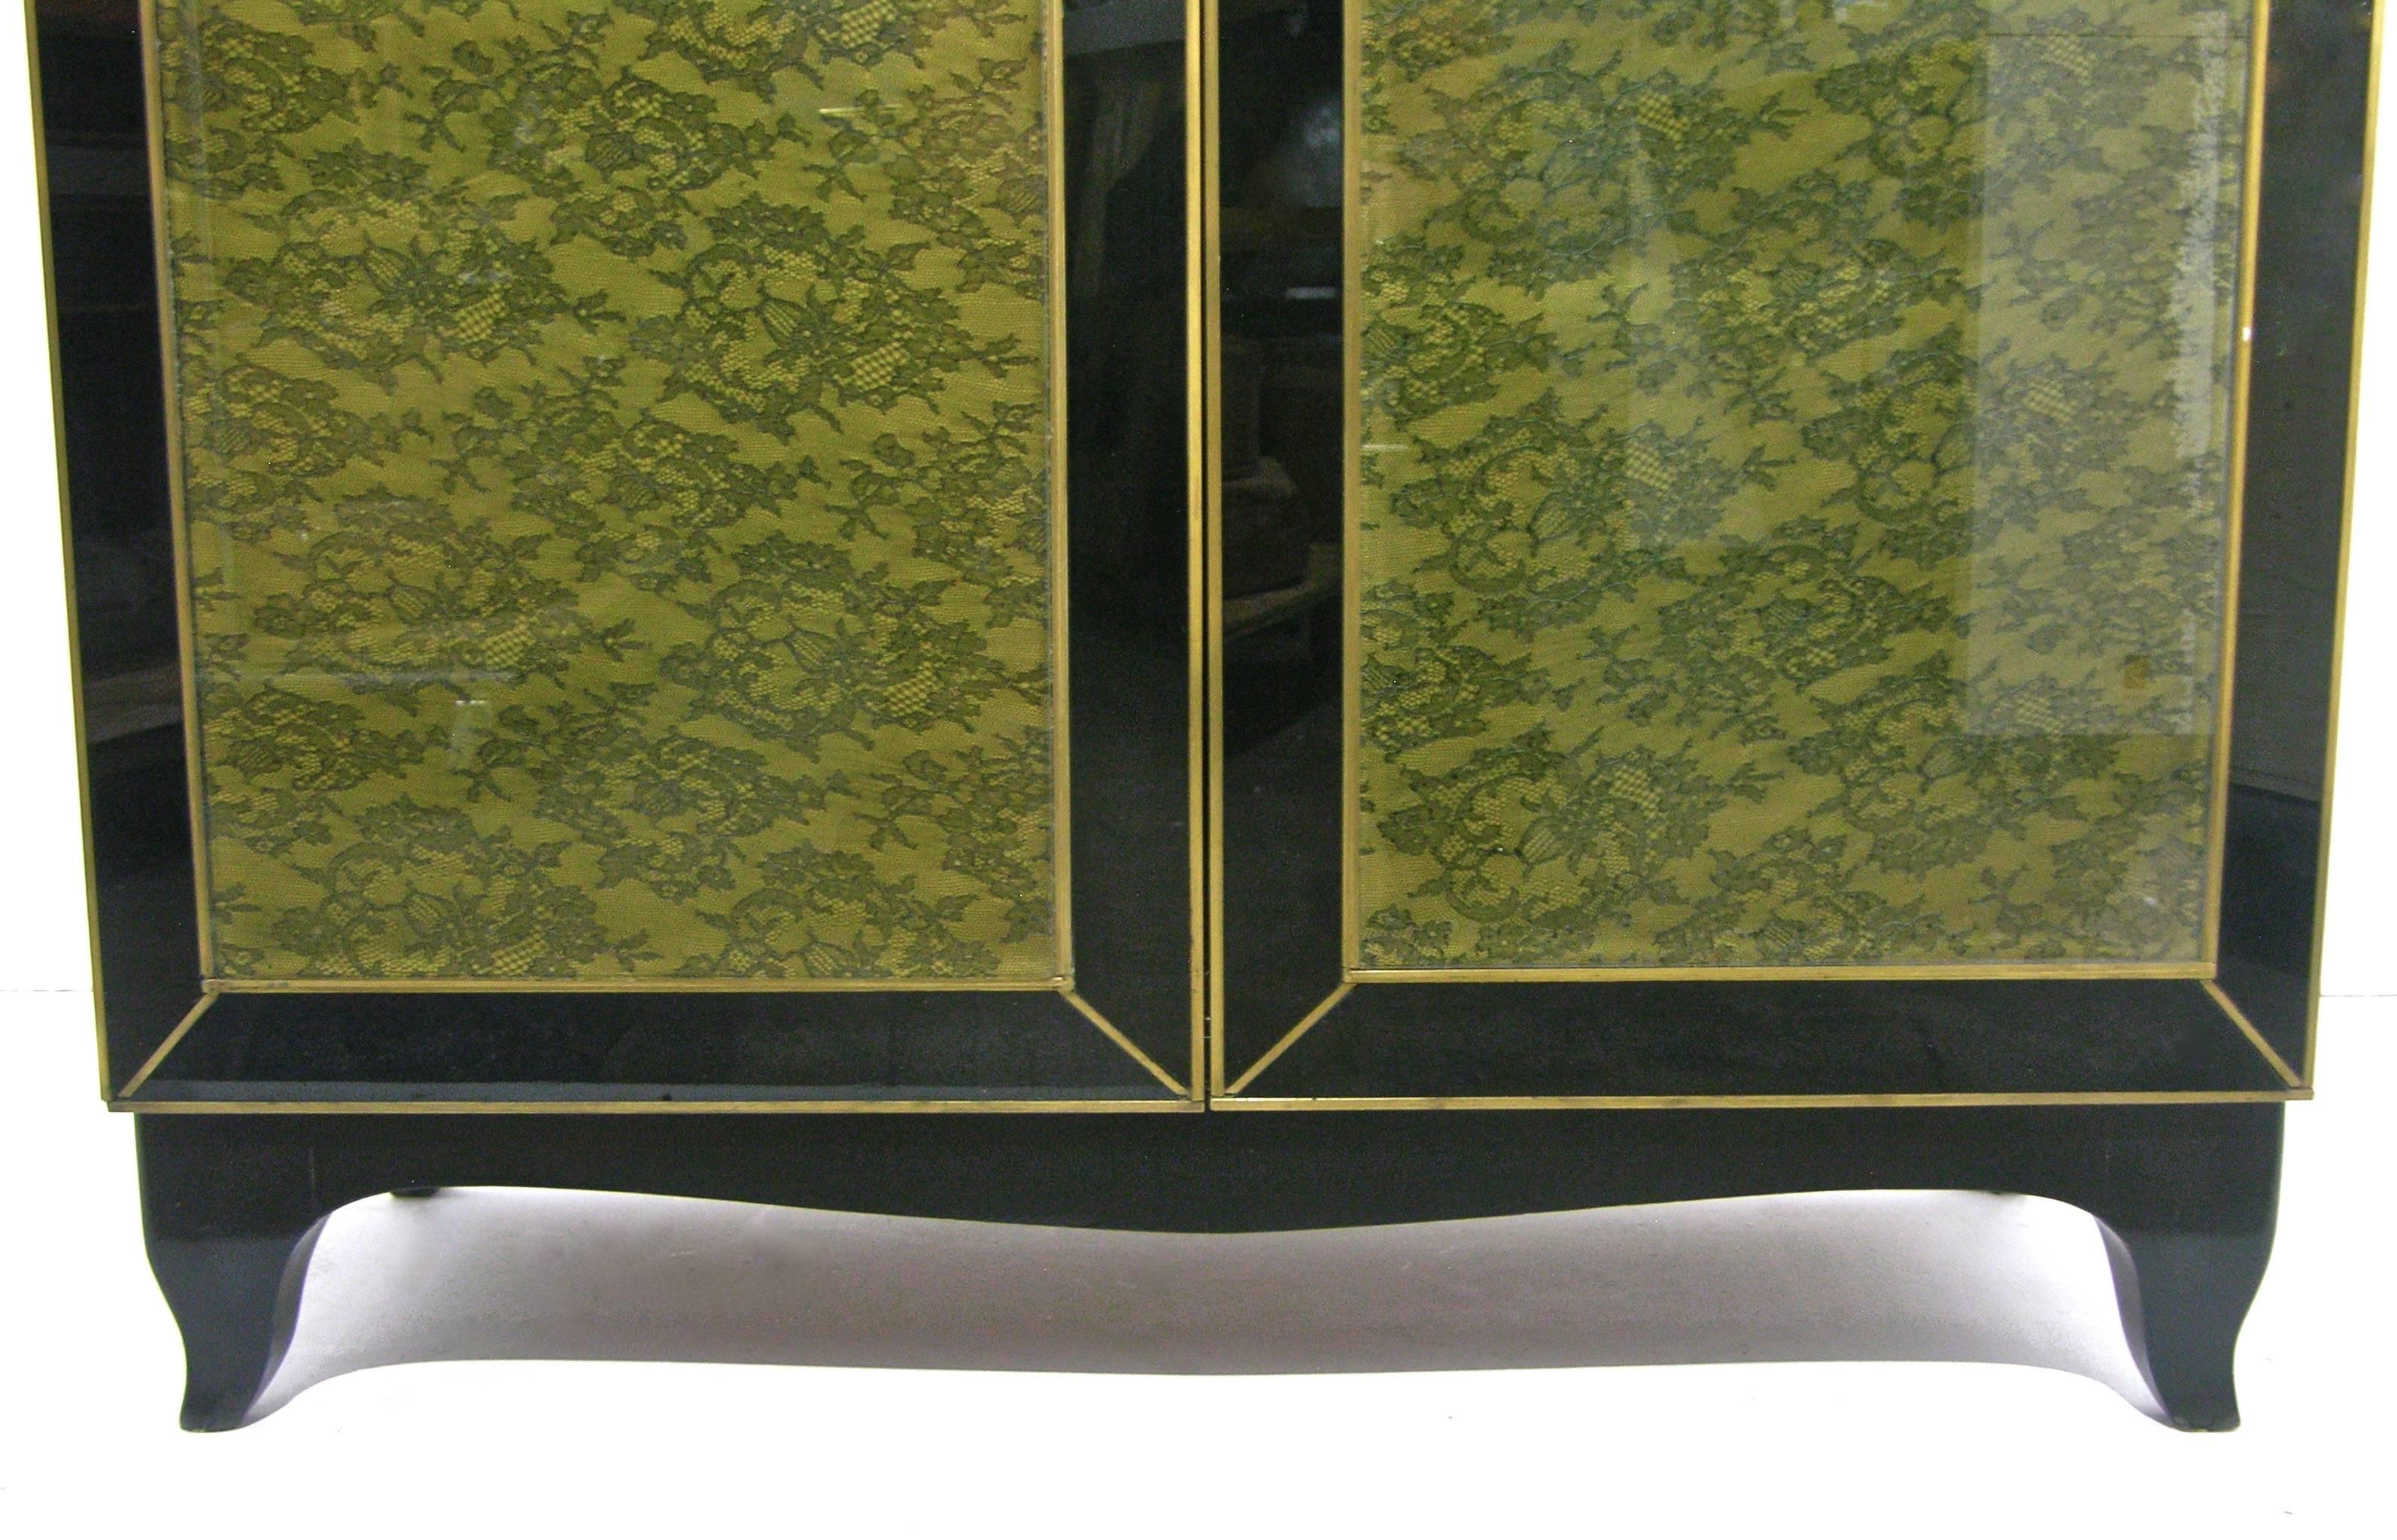 Bronze 1970s One-of-a-Kind Italian Brass & Black Glass Cabinet with Green Lace Inlays